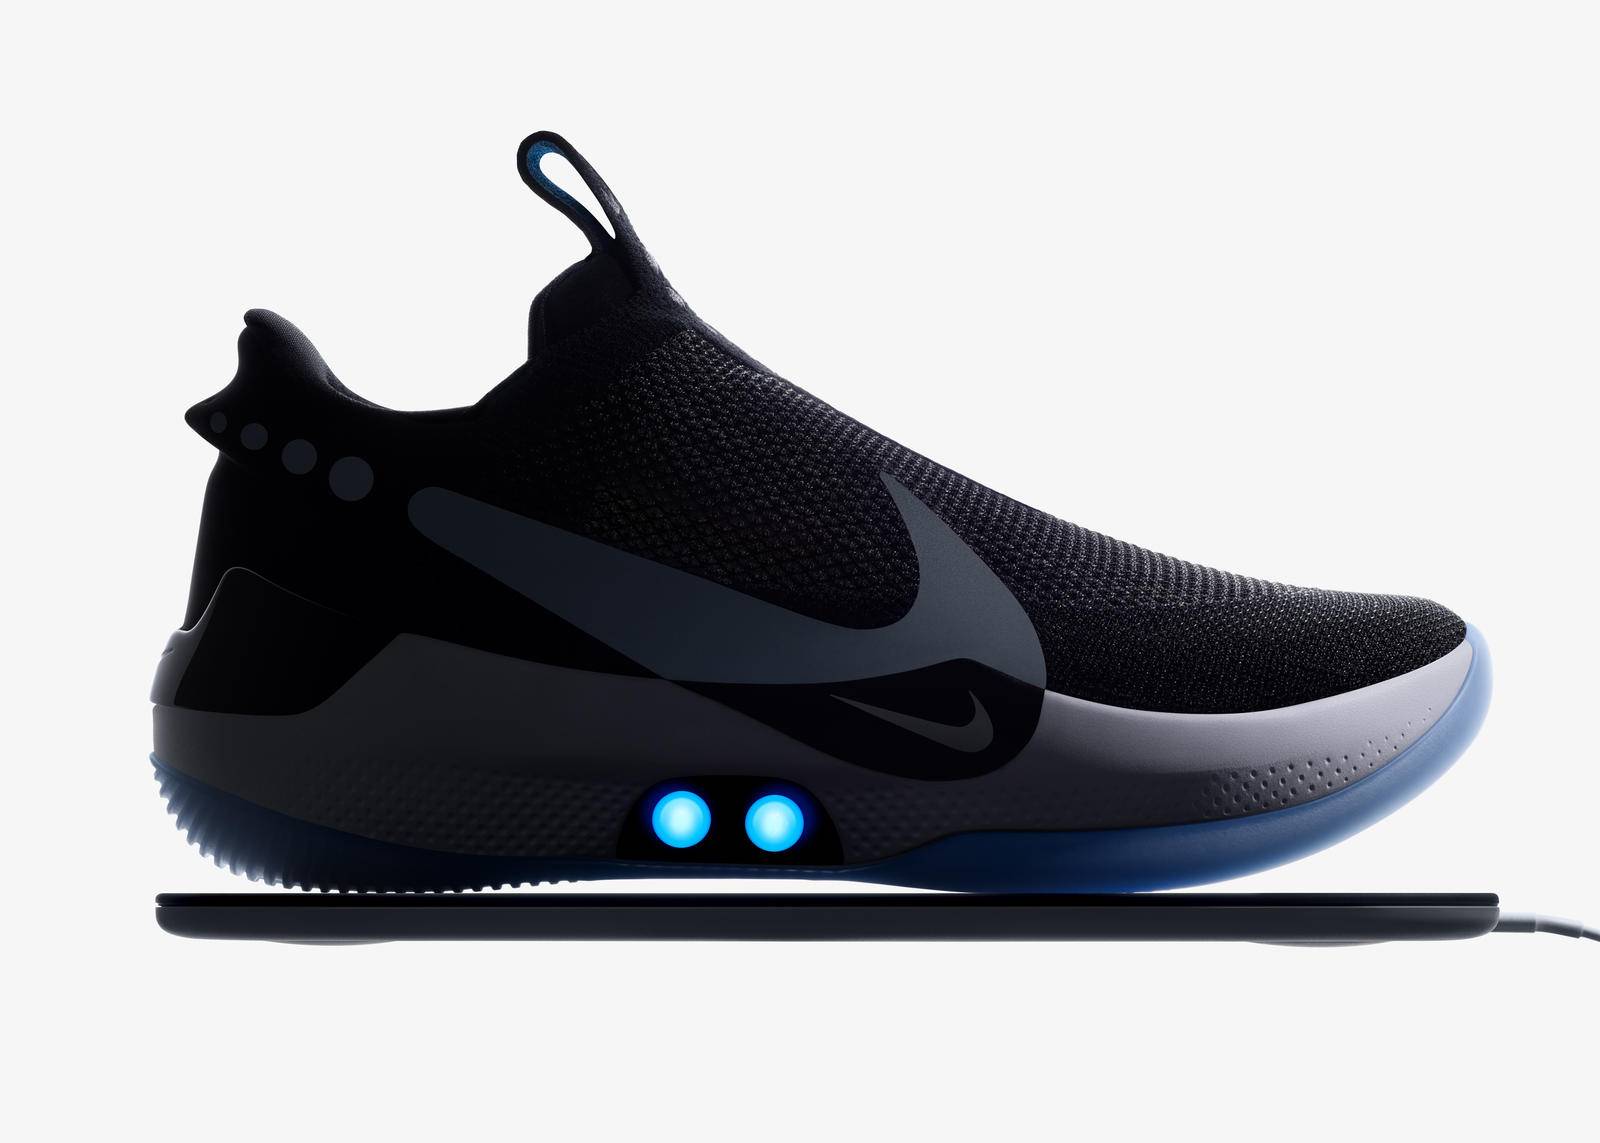 Nike's Adapt BB bball shoes ties its 